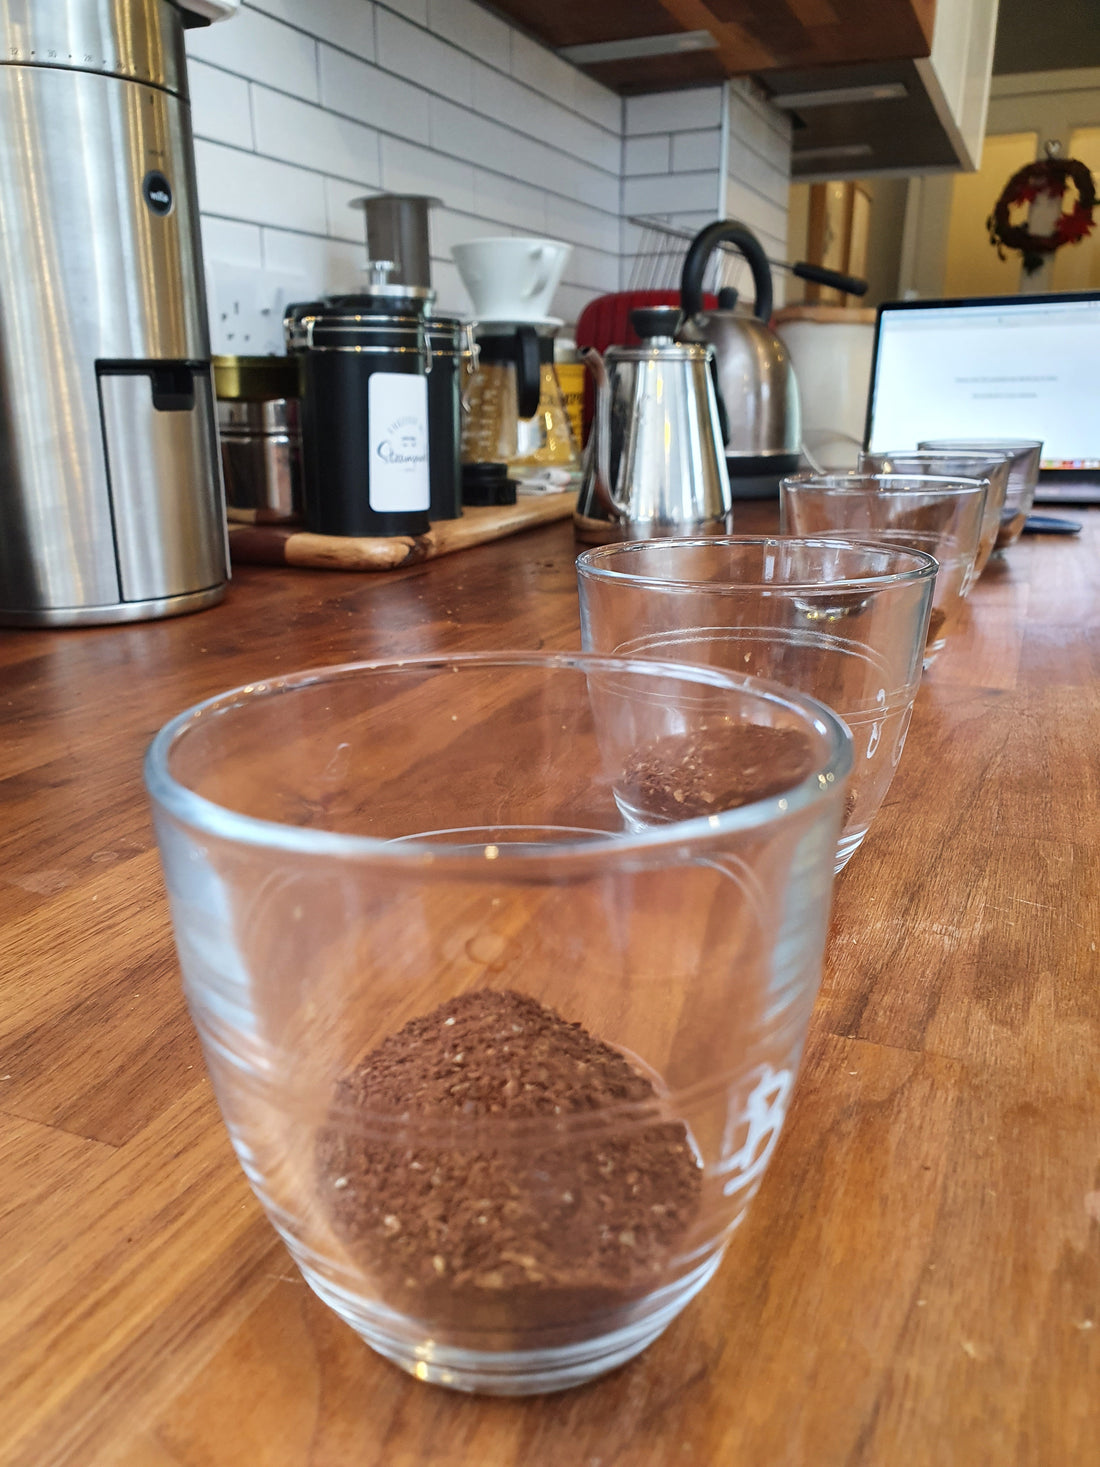 My Experience Cupping Coffee with Steampunk